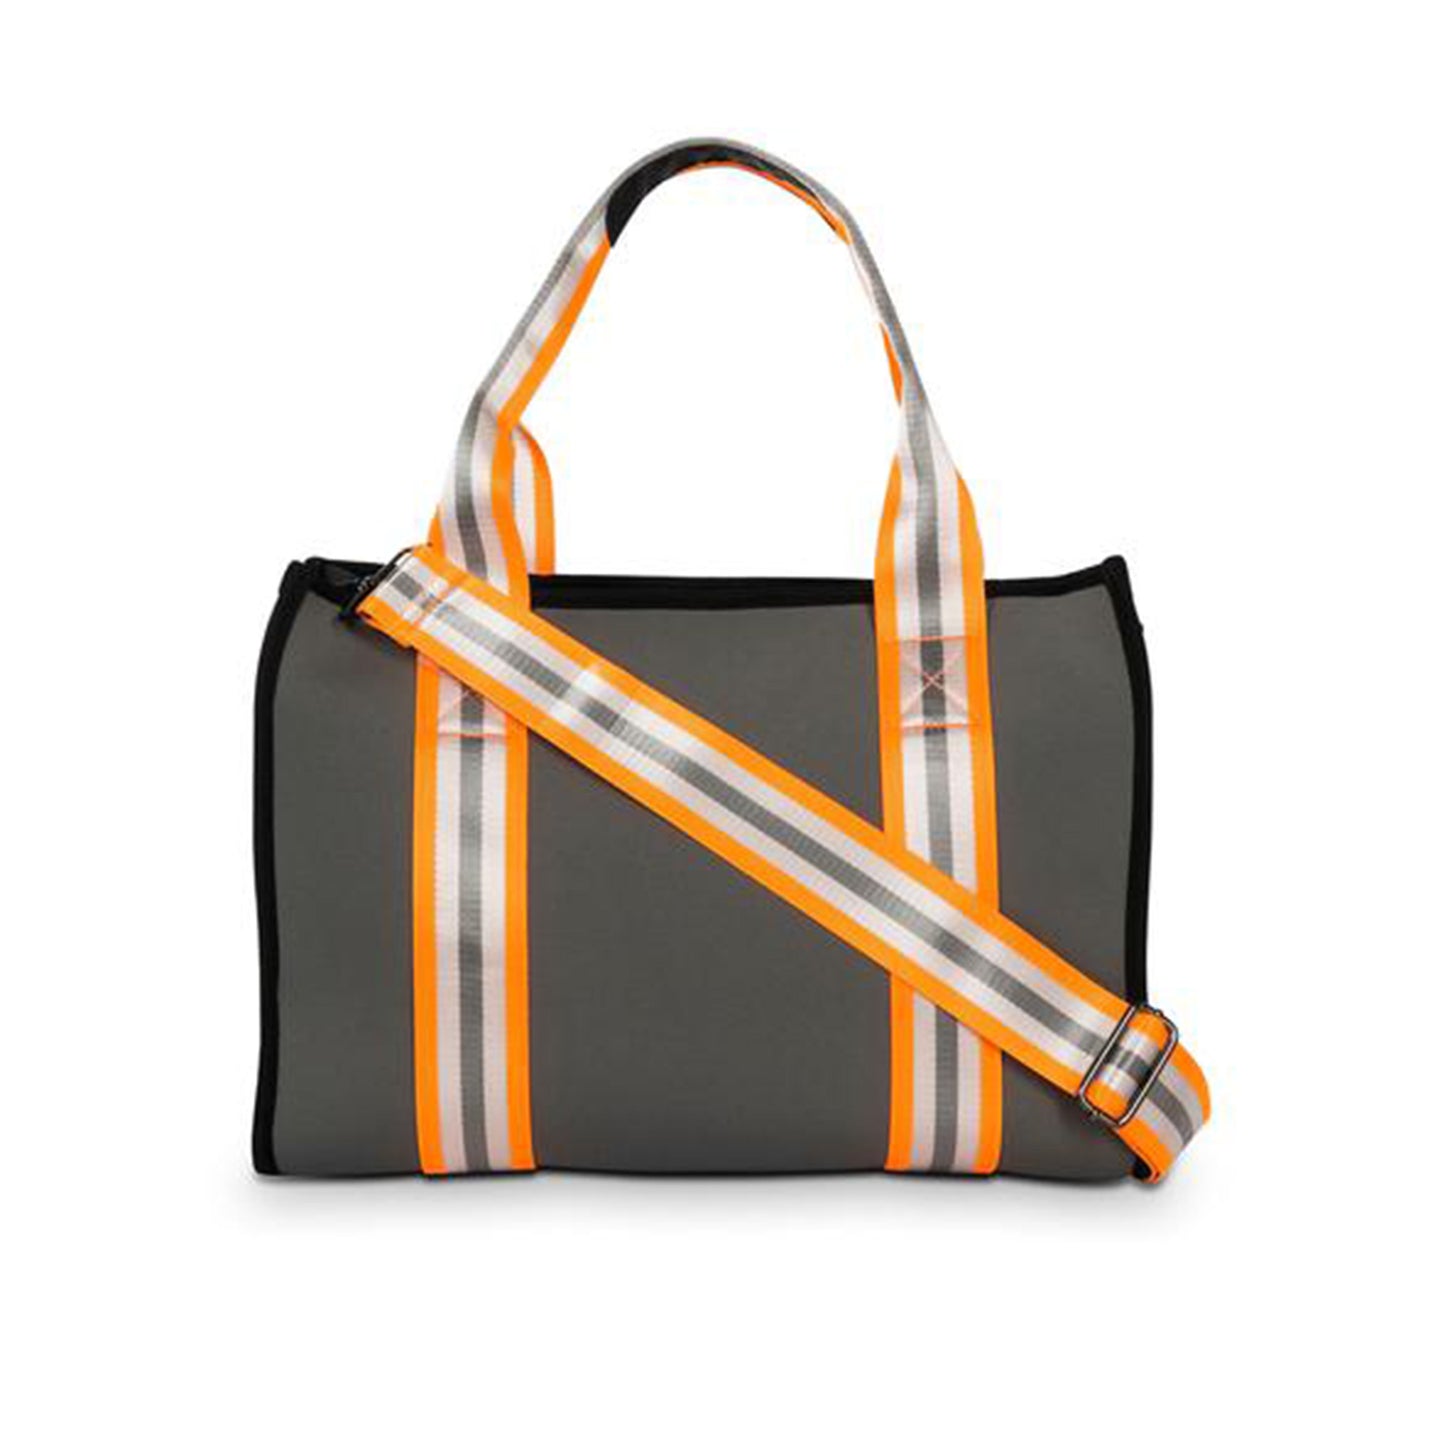 Haute Shore Isla Hip Tote Bag. Add this tote to any of your looks for a fresh update. Featuring a grey non perforated neoprene material, an orange, silver, and grey stripe strap, structured book tote style, removable crossbody, removable wristlet pouch, and interior pockets. 